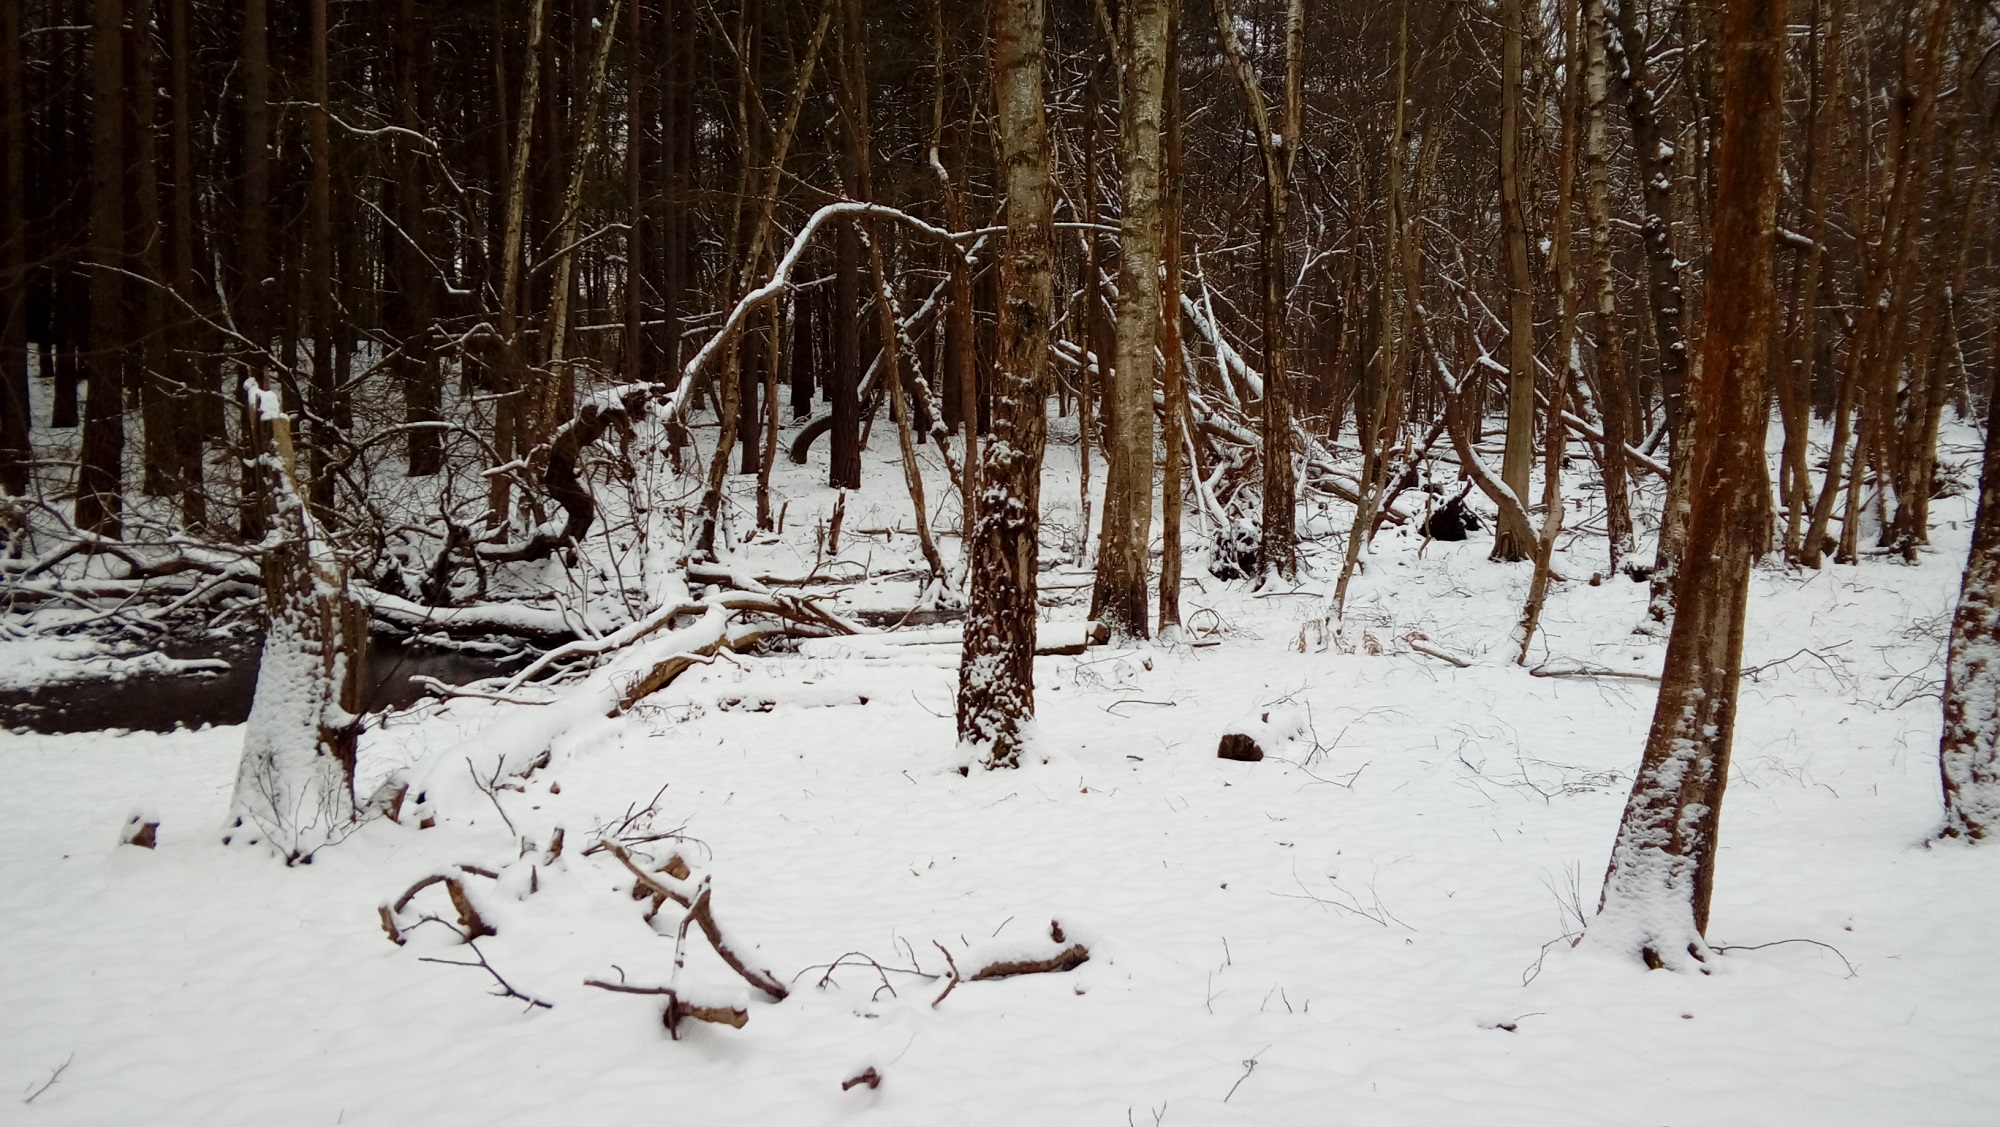 Snow lies thick on the ground in a woodland area, with snowdrifts on tree trunks, and snow resting on branches.